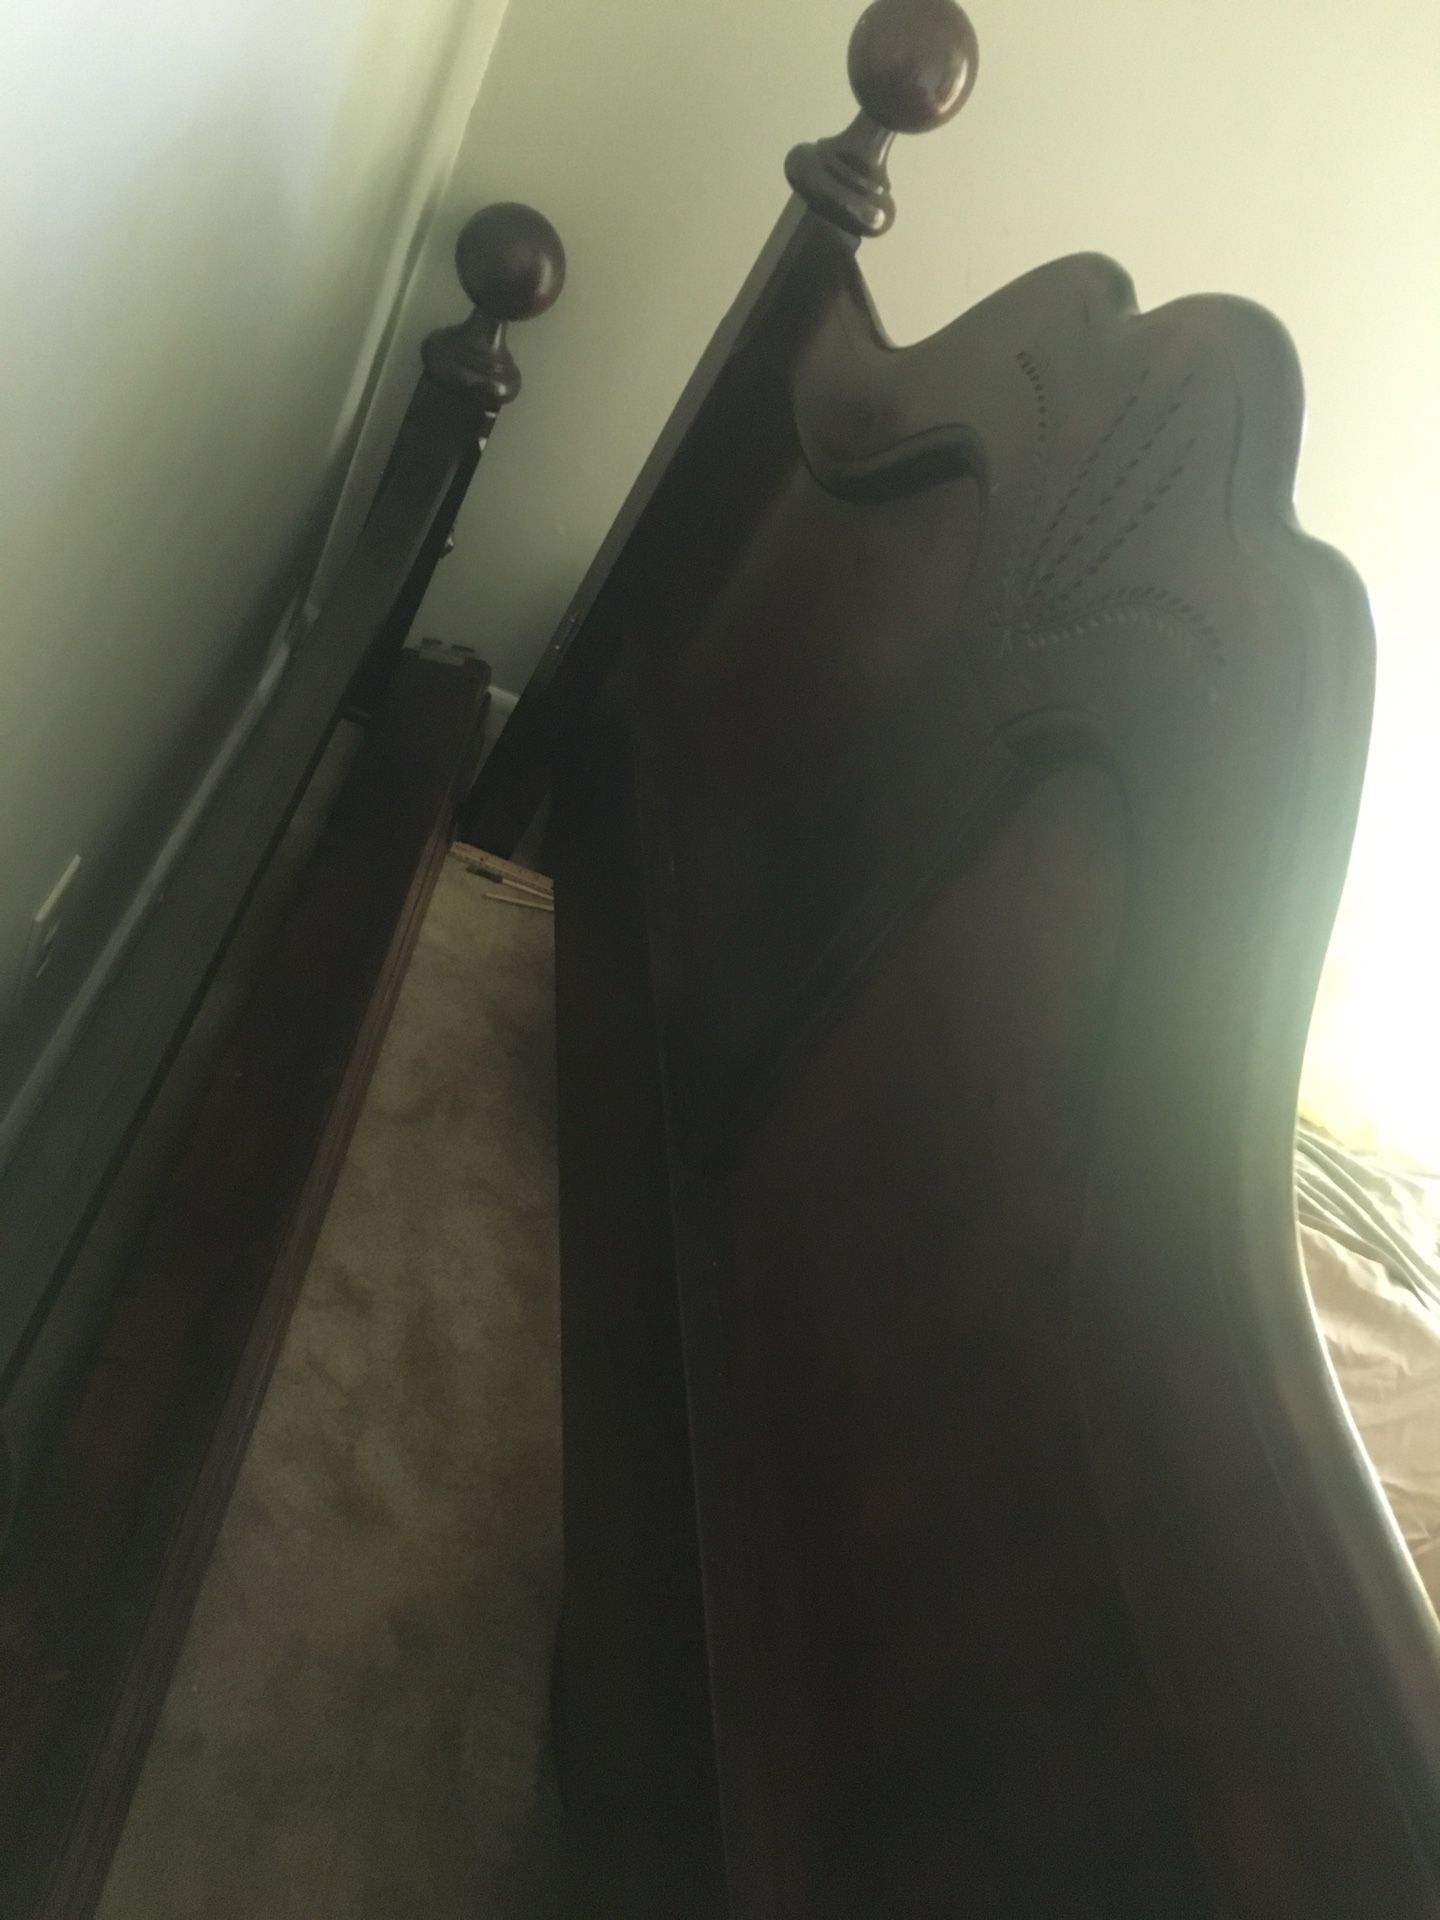 This bed frame it’s in good condition it’s also really heavy